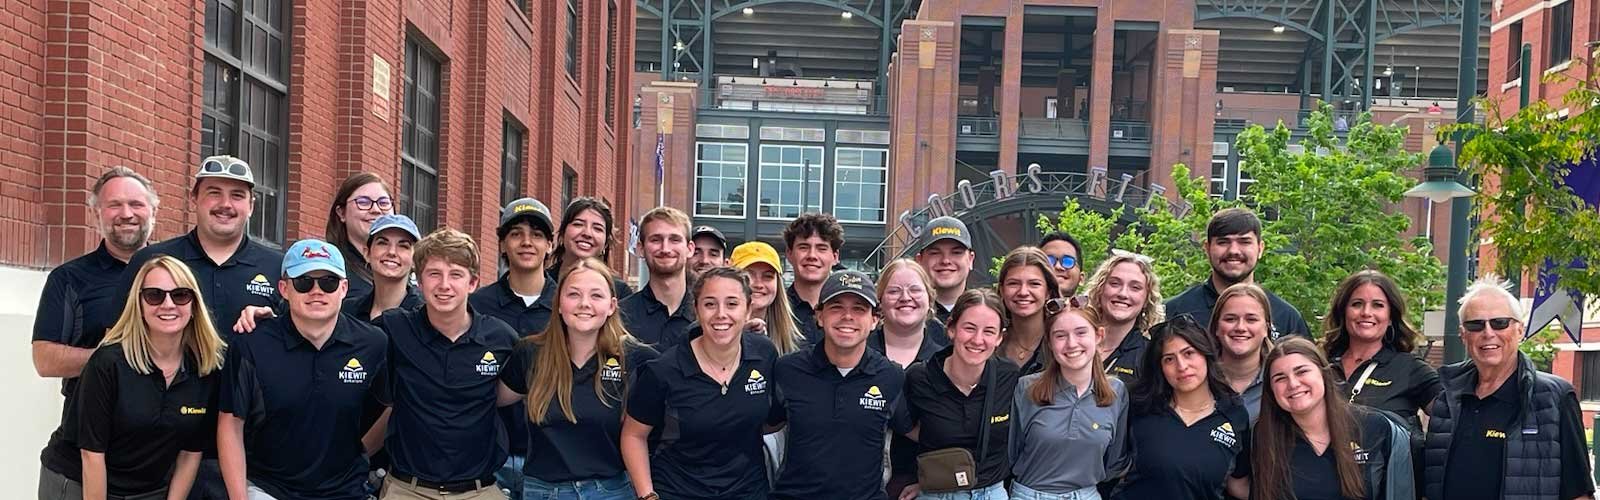 Scholars pose for a photo in front of Coors Field in Denver, CO.